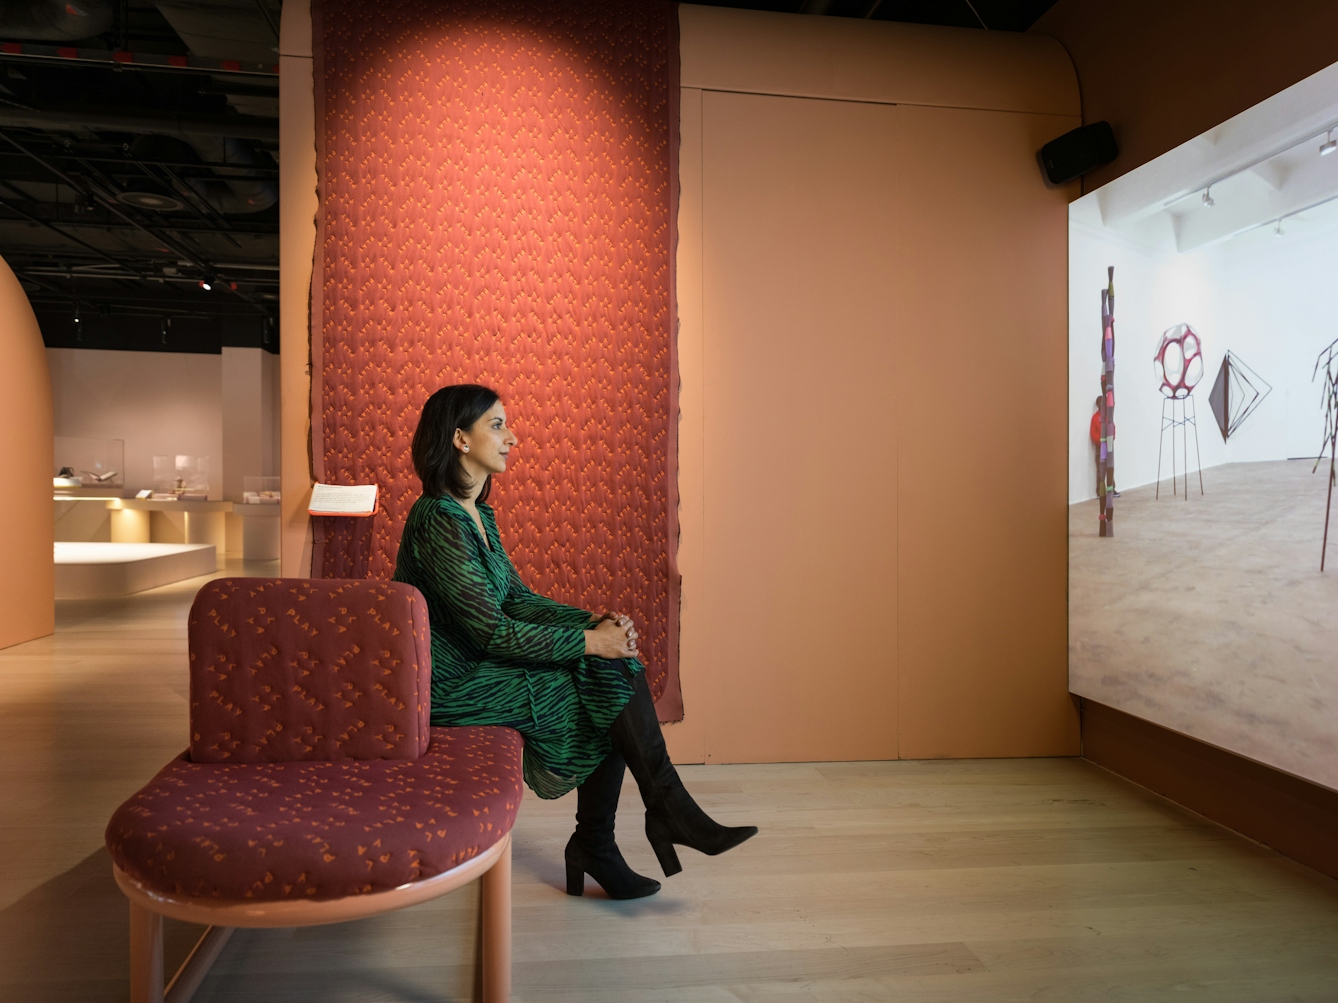 Photograph of a woman in an exhibition gallery space sitting on an upholstered bench, with her hand clasped around her crossed legs. She is watching a large projection screen to the right of frame.